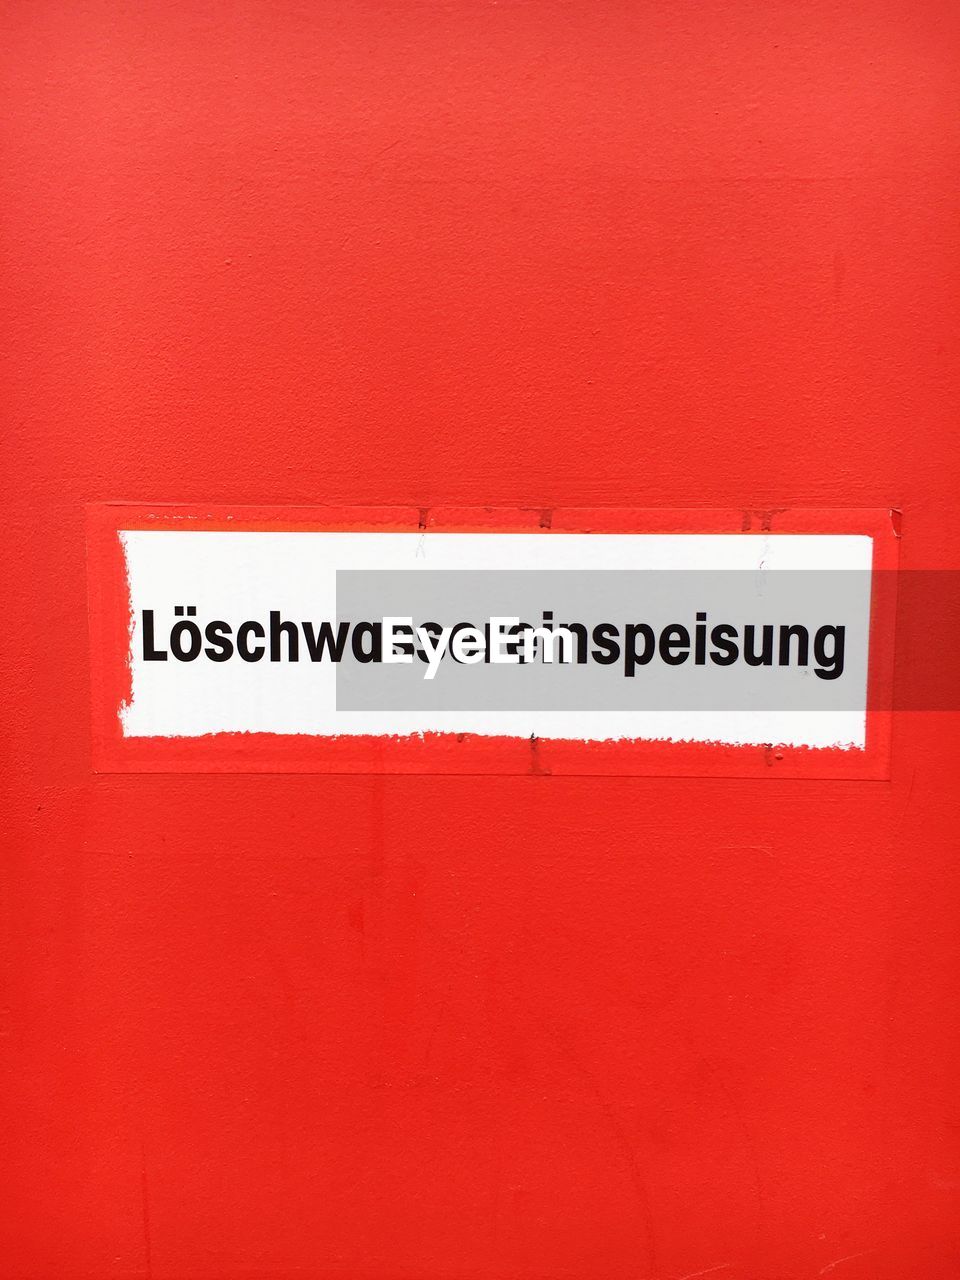 Information sign on red wall